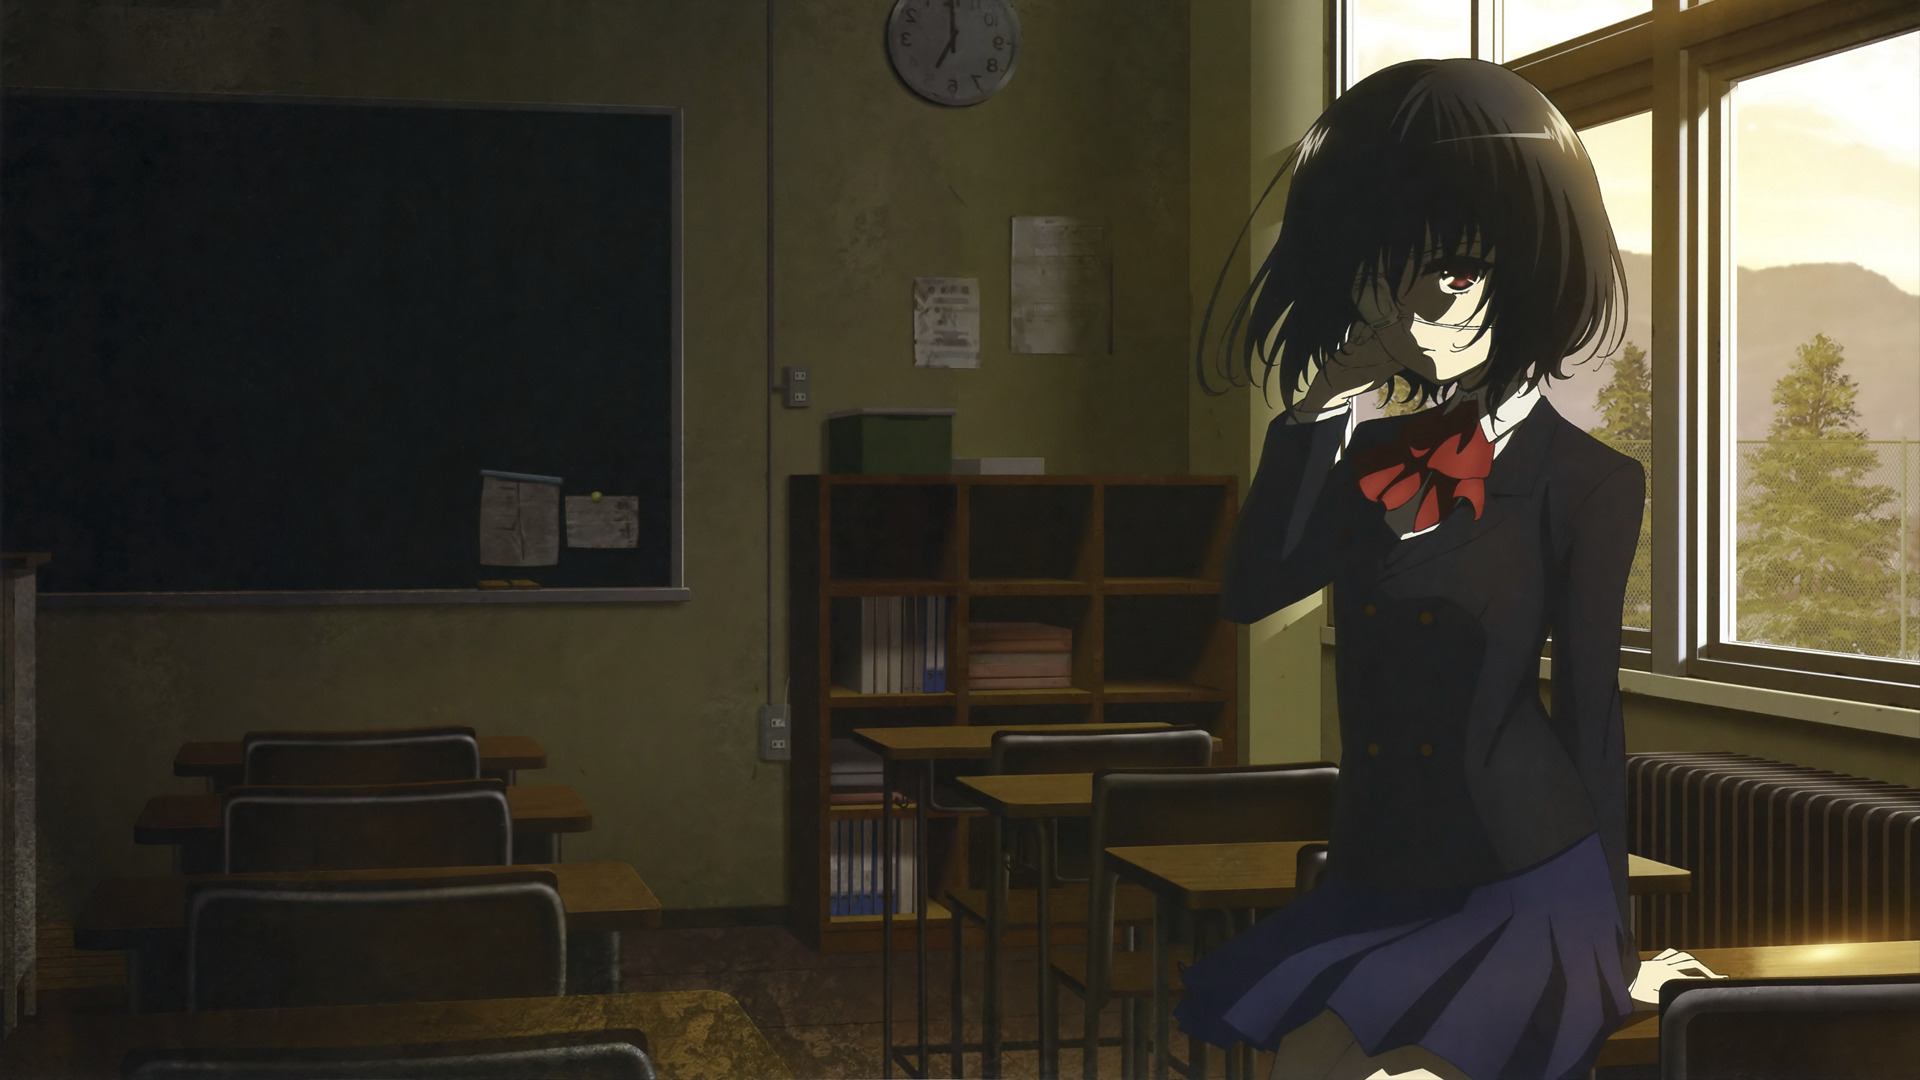 Another, Misaki Mei, School Uniform, Classroom, Anime Girls, Eyepatches  Wallpapers HD / Desktop and Mobile Backgrounds